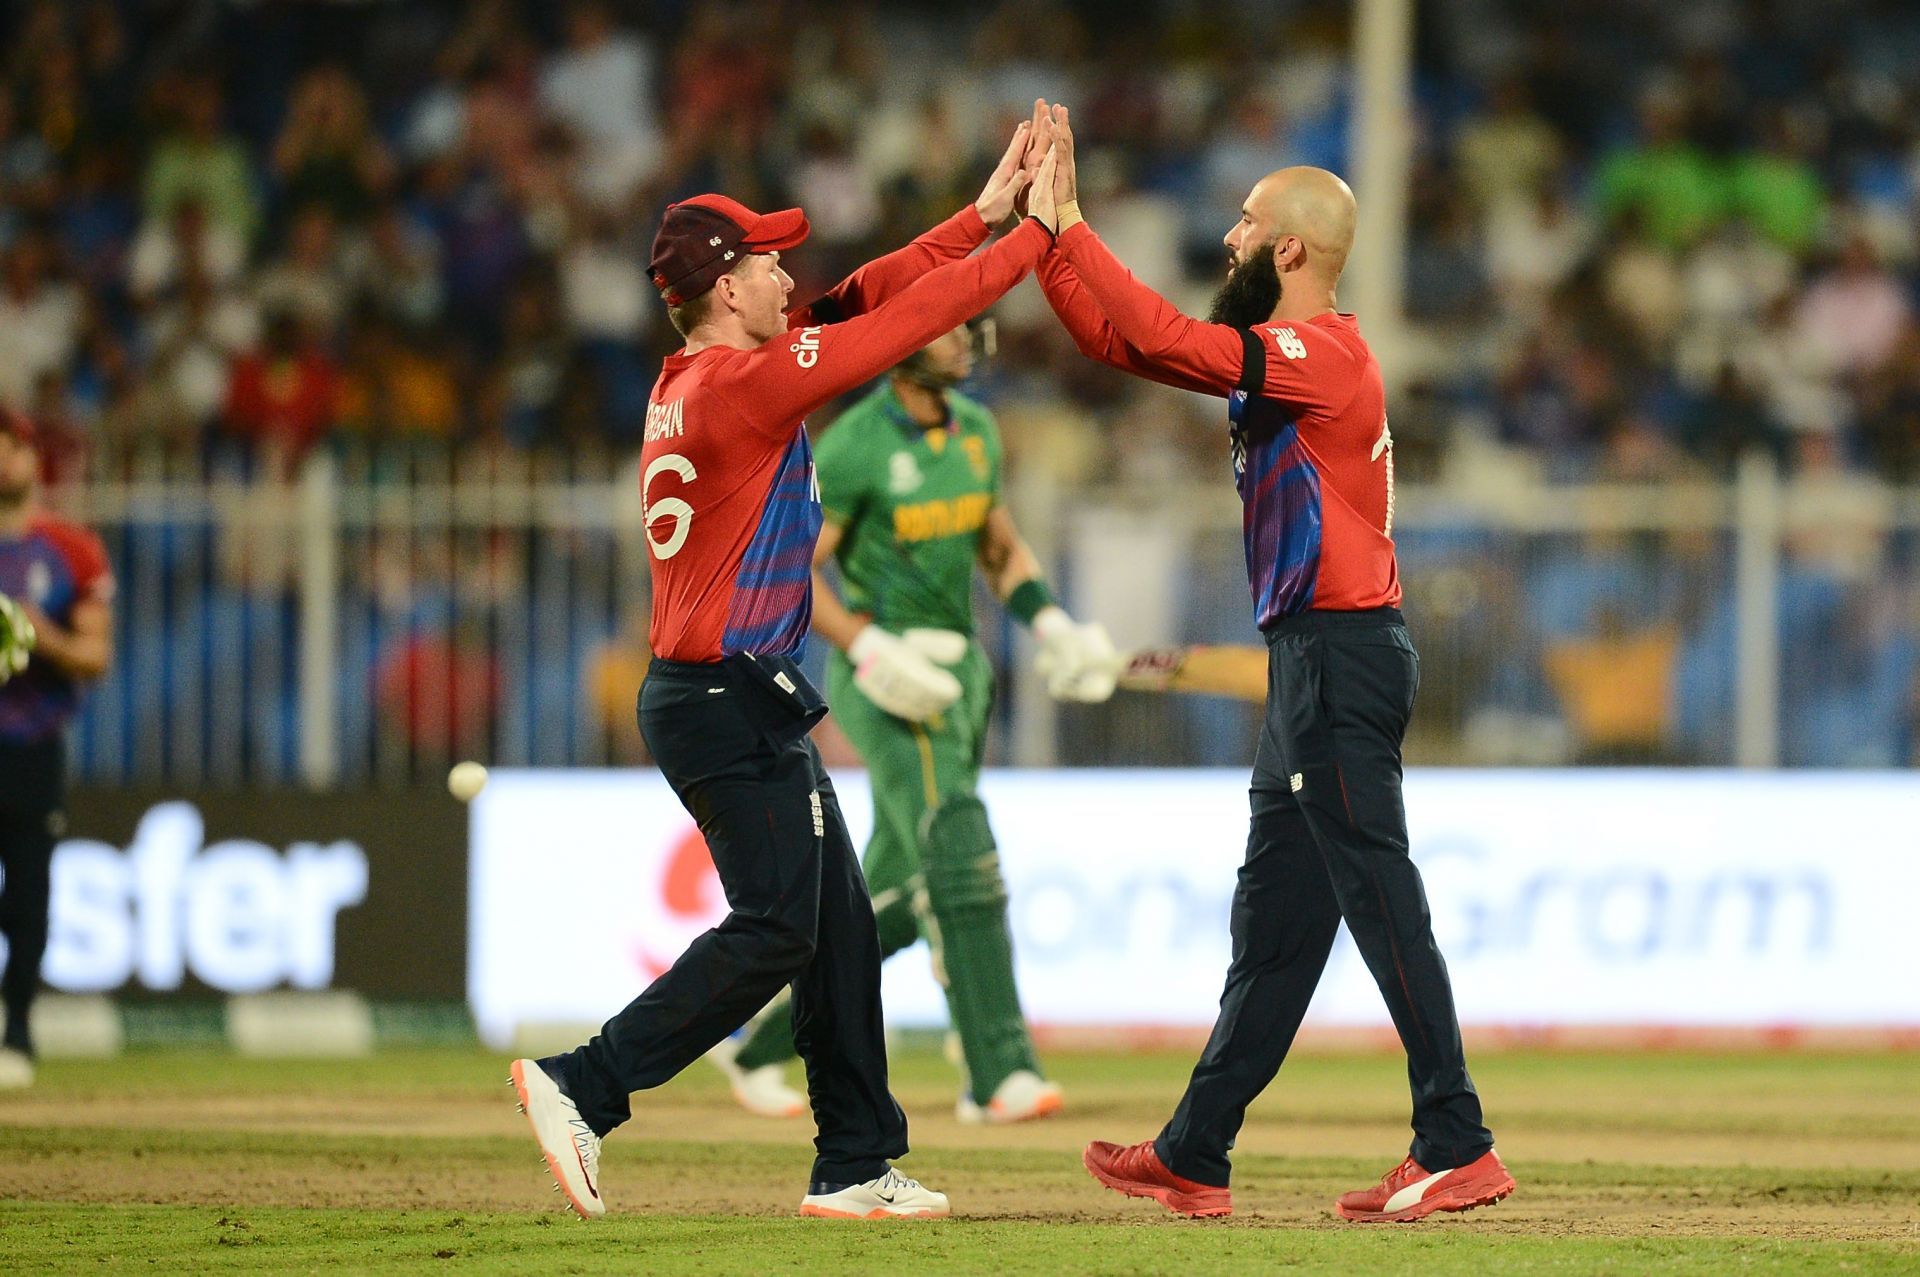 Moeen Ali (R) celebrates a wicket. Pic: Getty Images